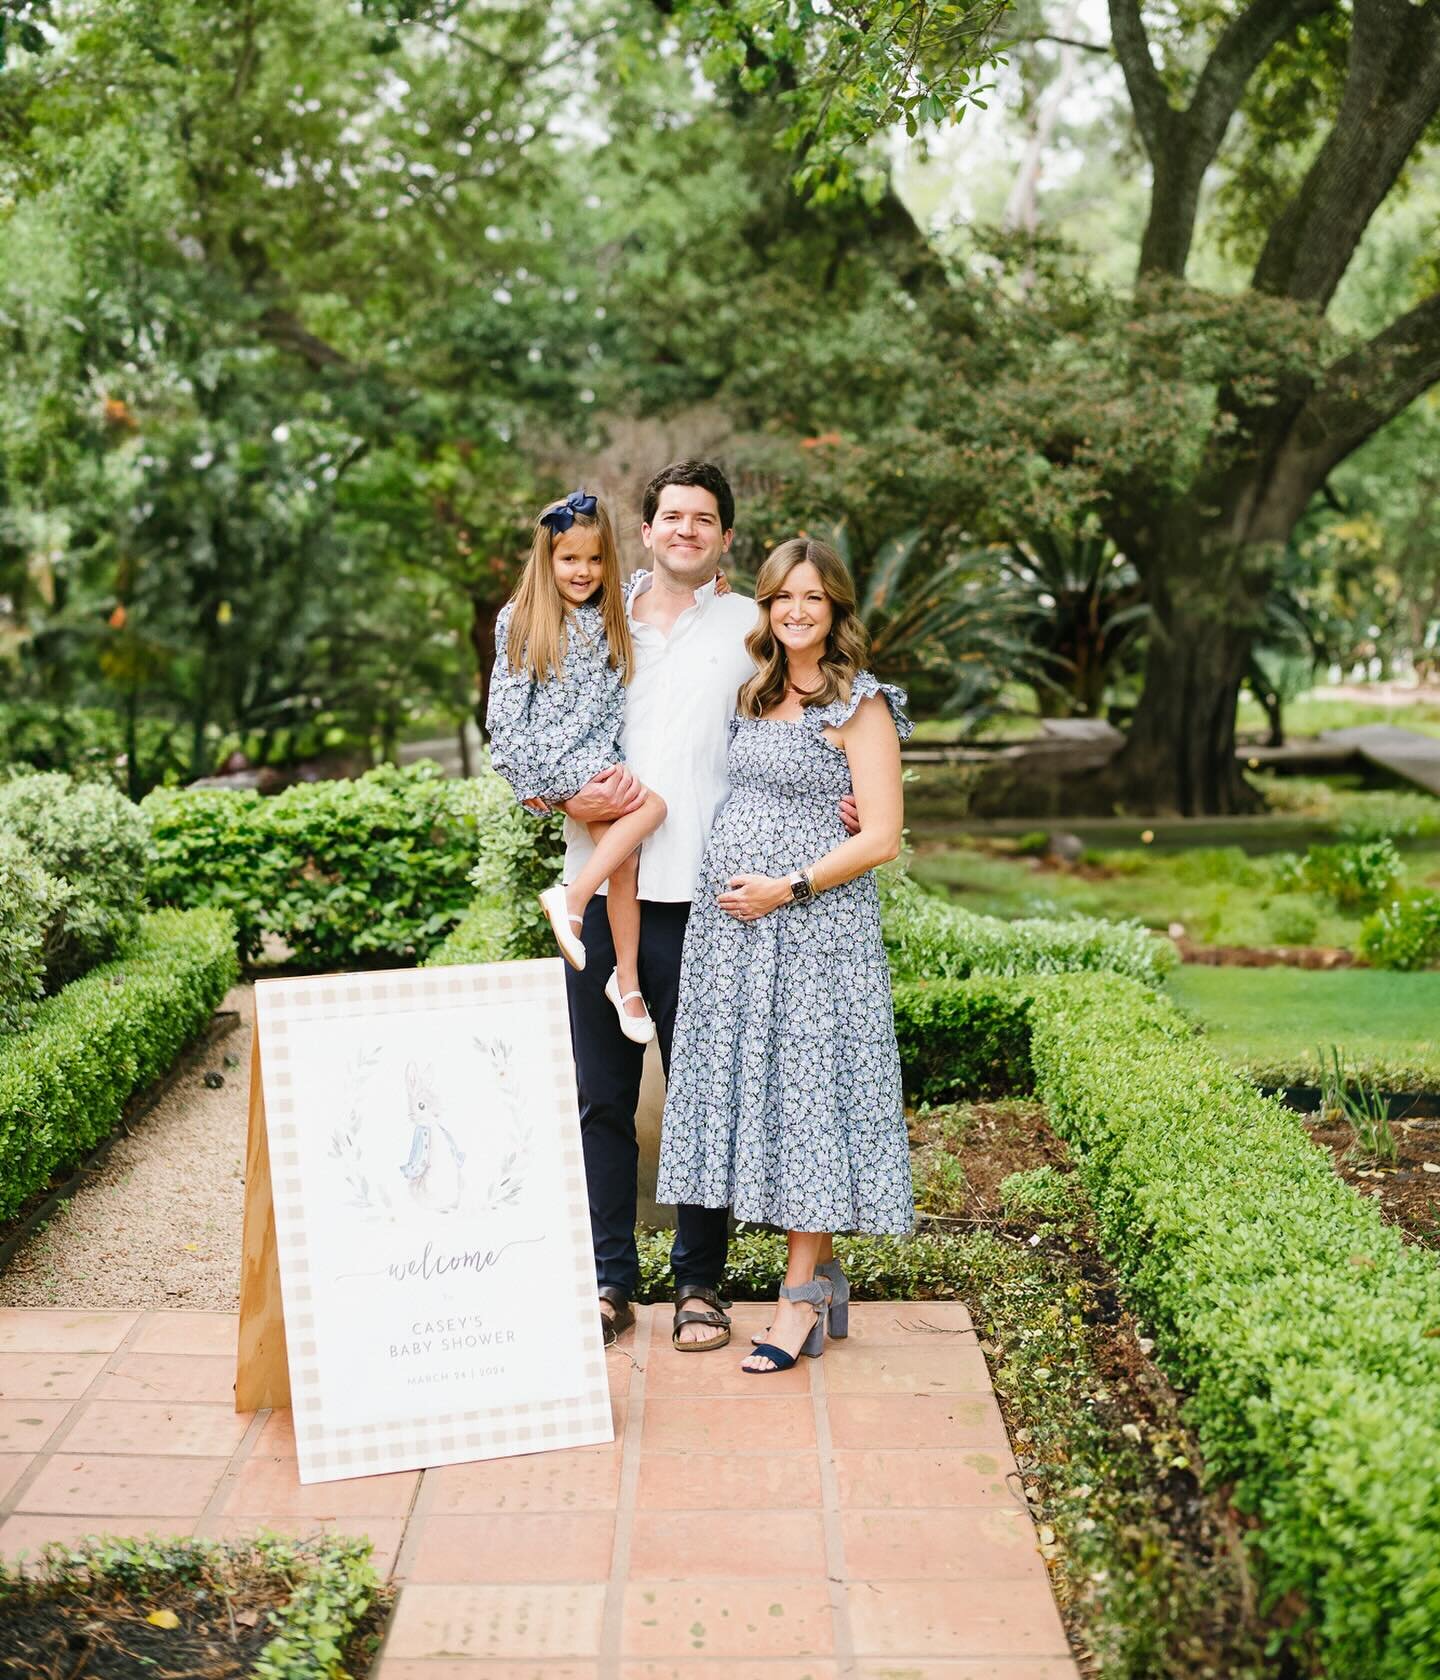 The sweetest celebration for our baby boy surrounded by so many of my favorite people who have prayed us through these years and now through this pregnancy. Thank you to @morganpruet , @sereeves , @christinamvaughan , @em__stagram , @louannchaehandma